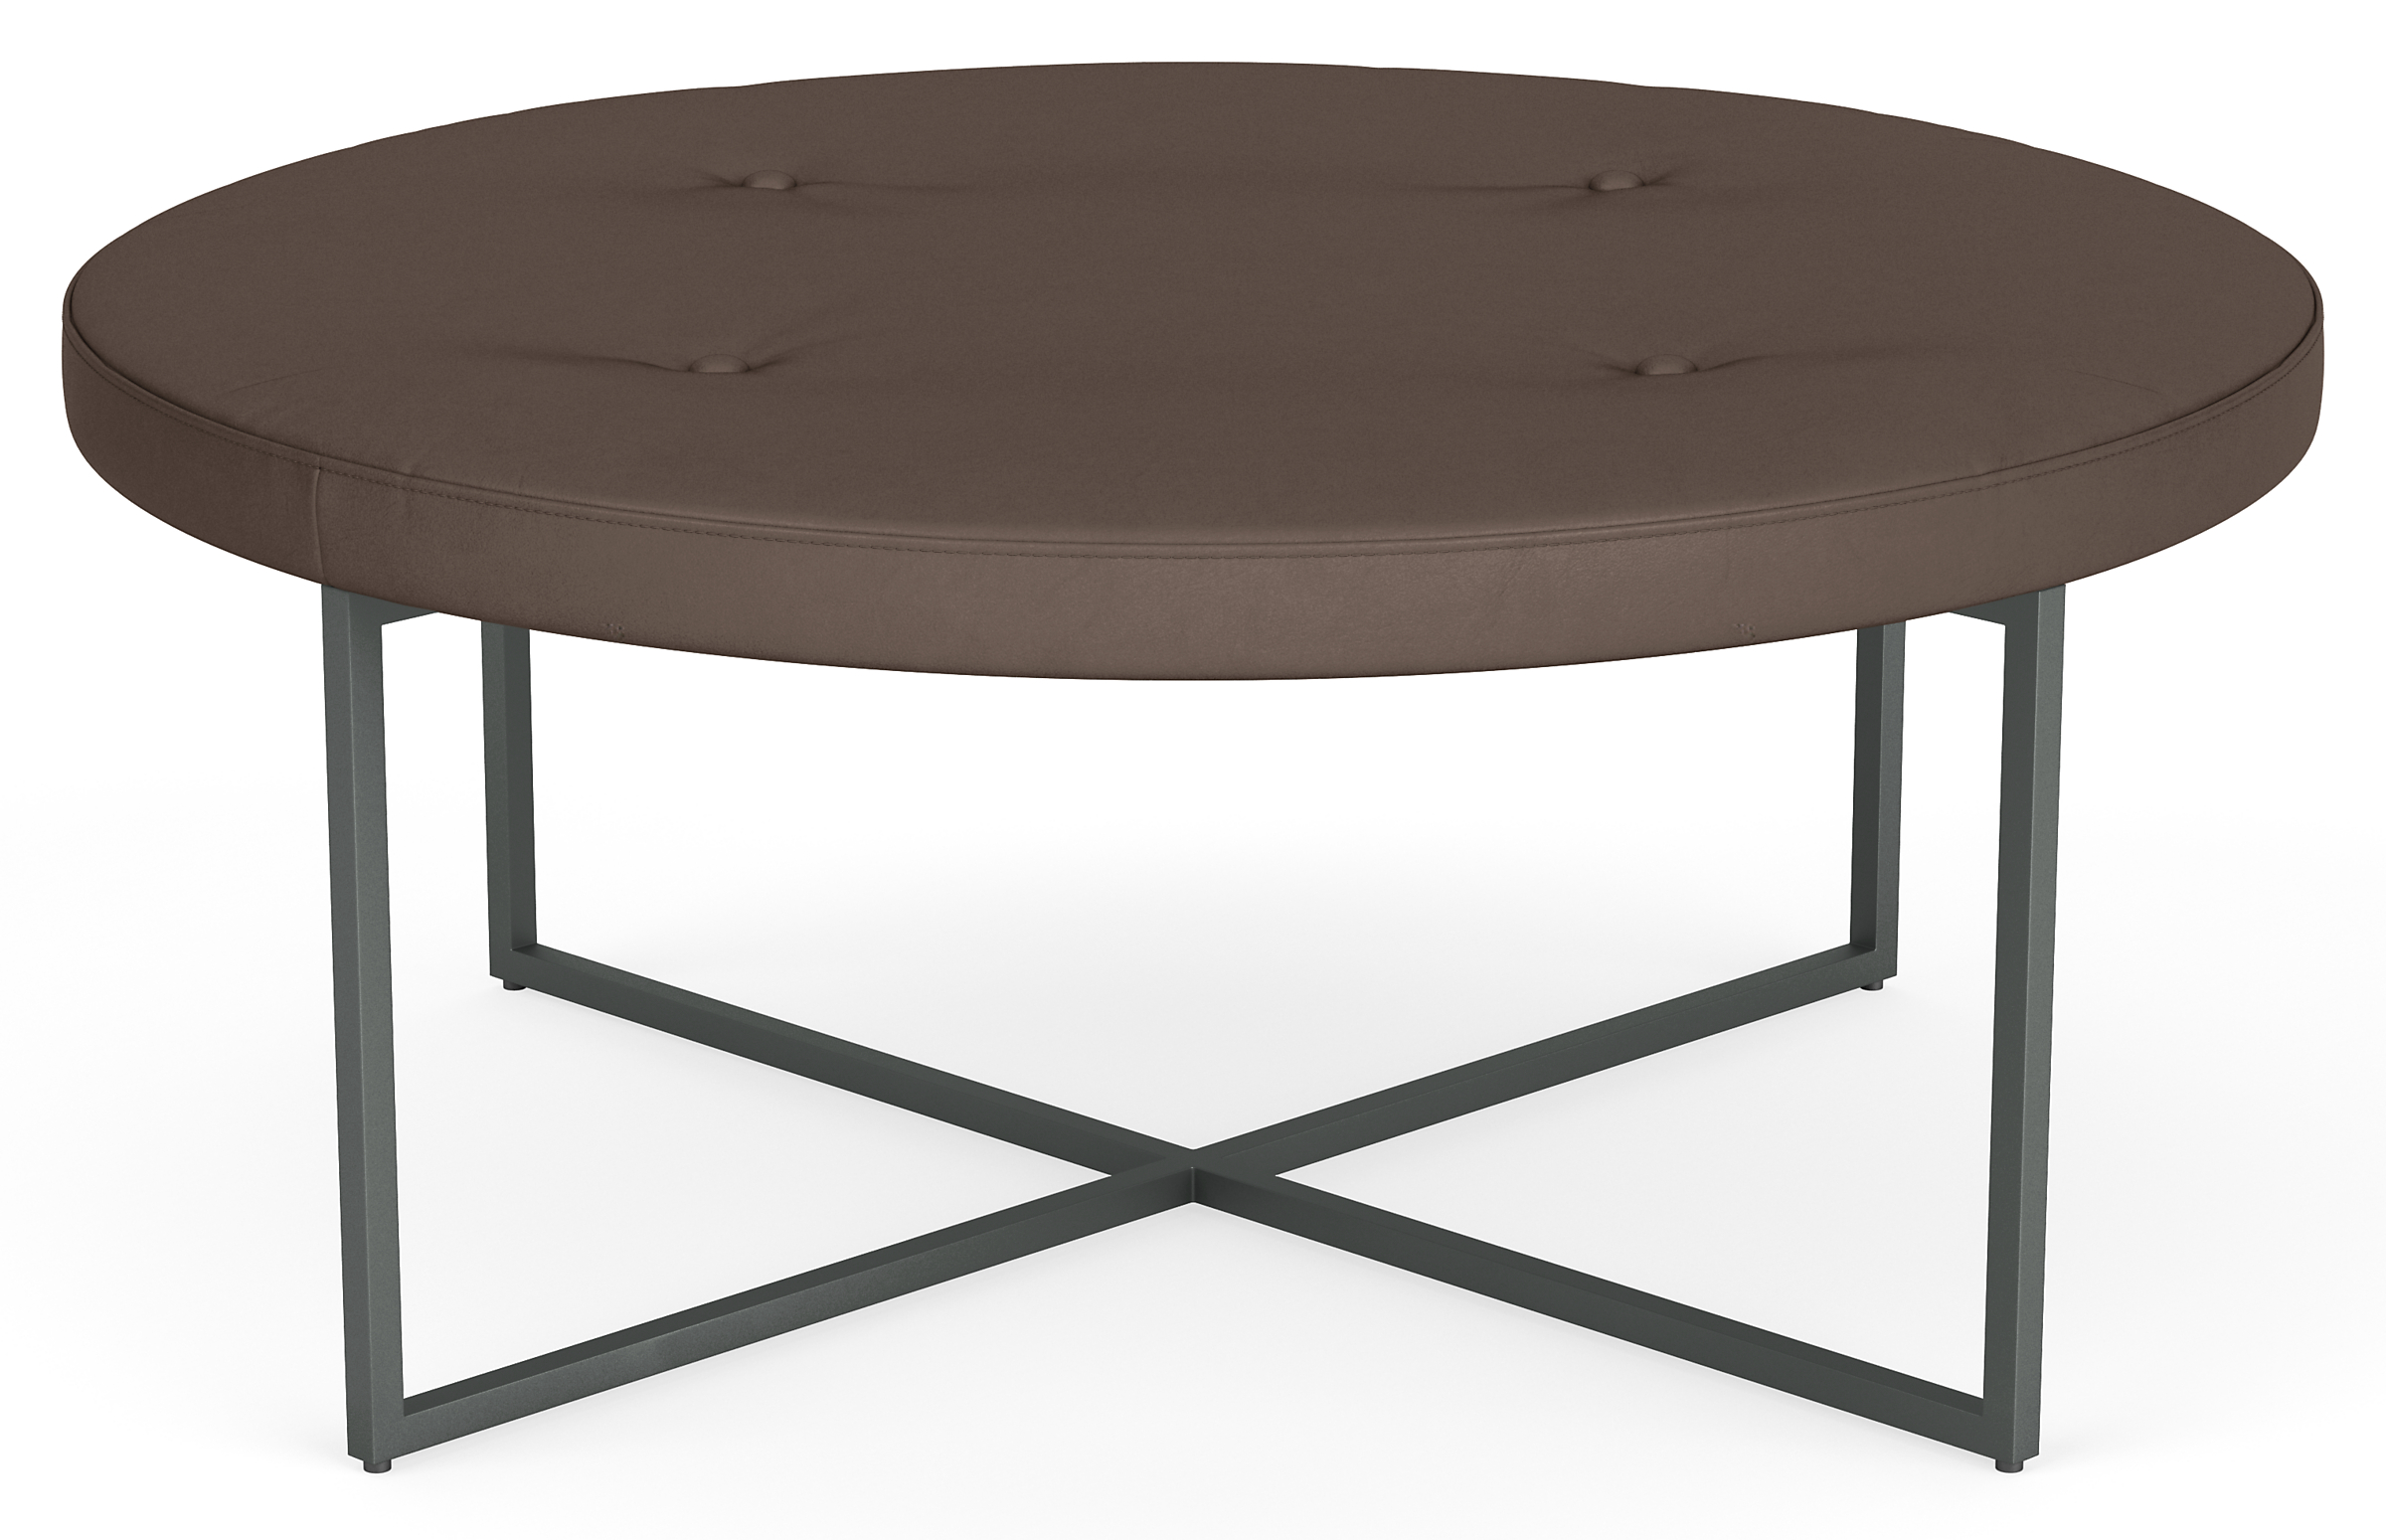 Sidney 36 diam 16h Round Ottoman in Cyrus Charcoal Leather w/Graphite Base